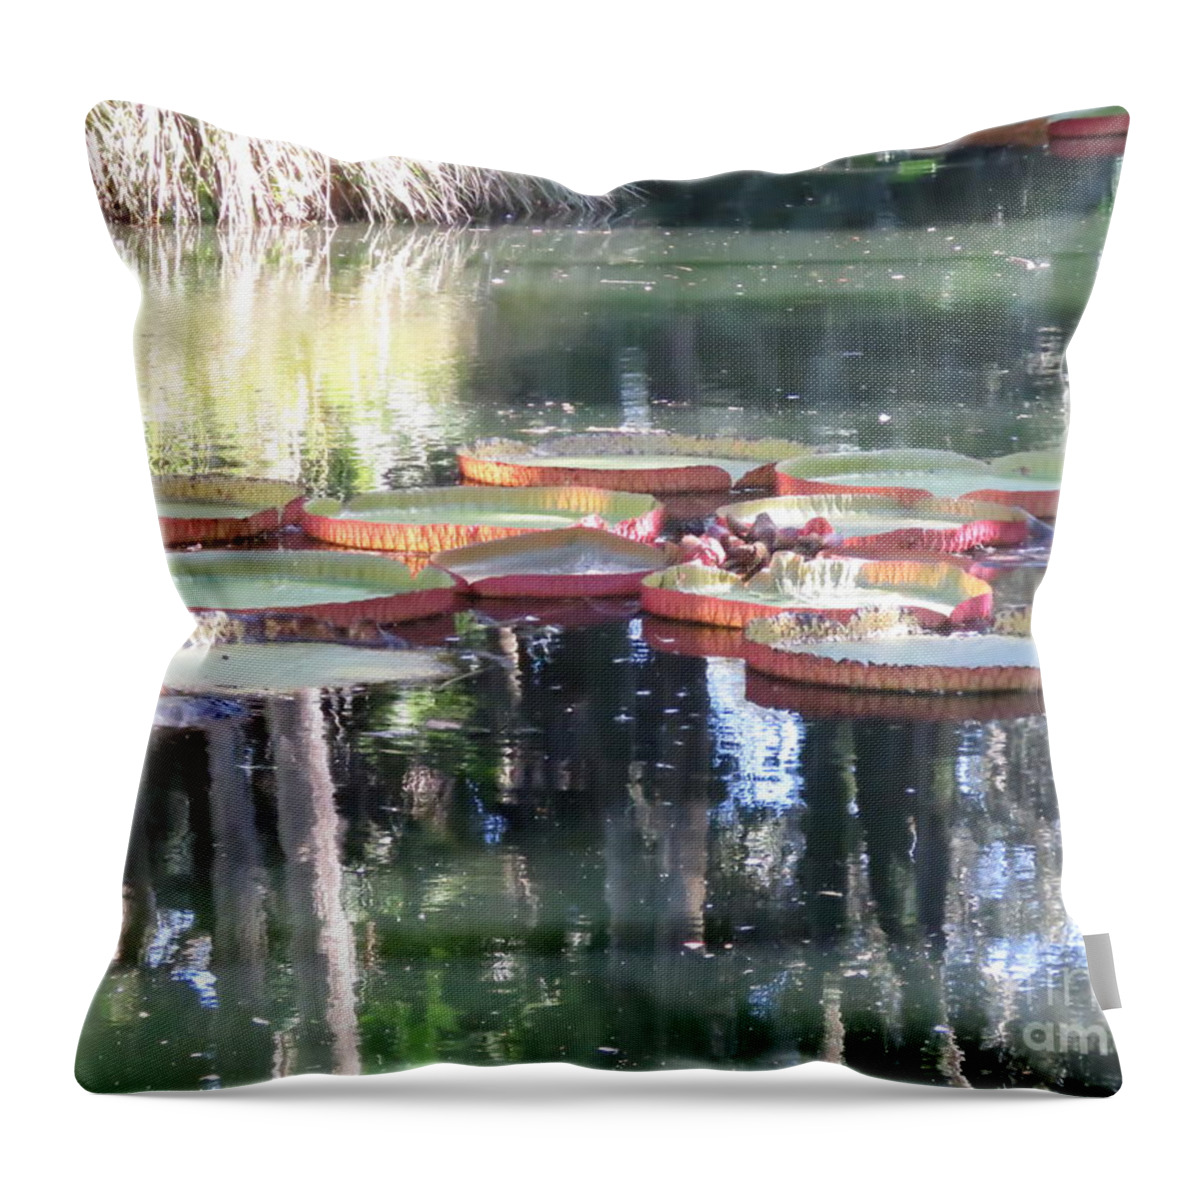 Amazon Water Lily Throw Pillow featuring the photograph Amazon Water Lilies by World Reflections By Sharon